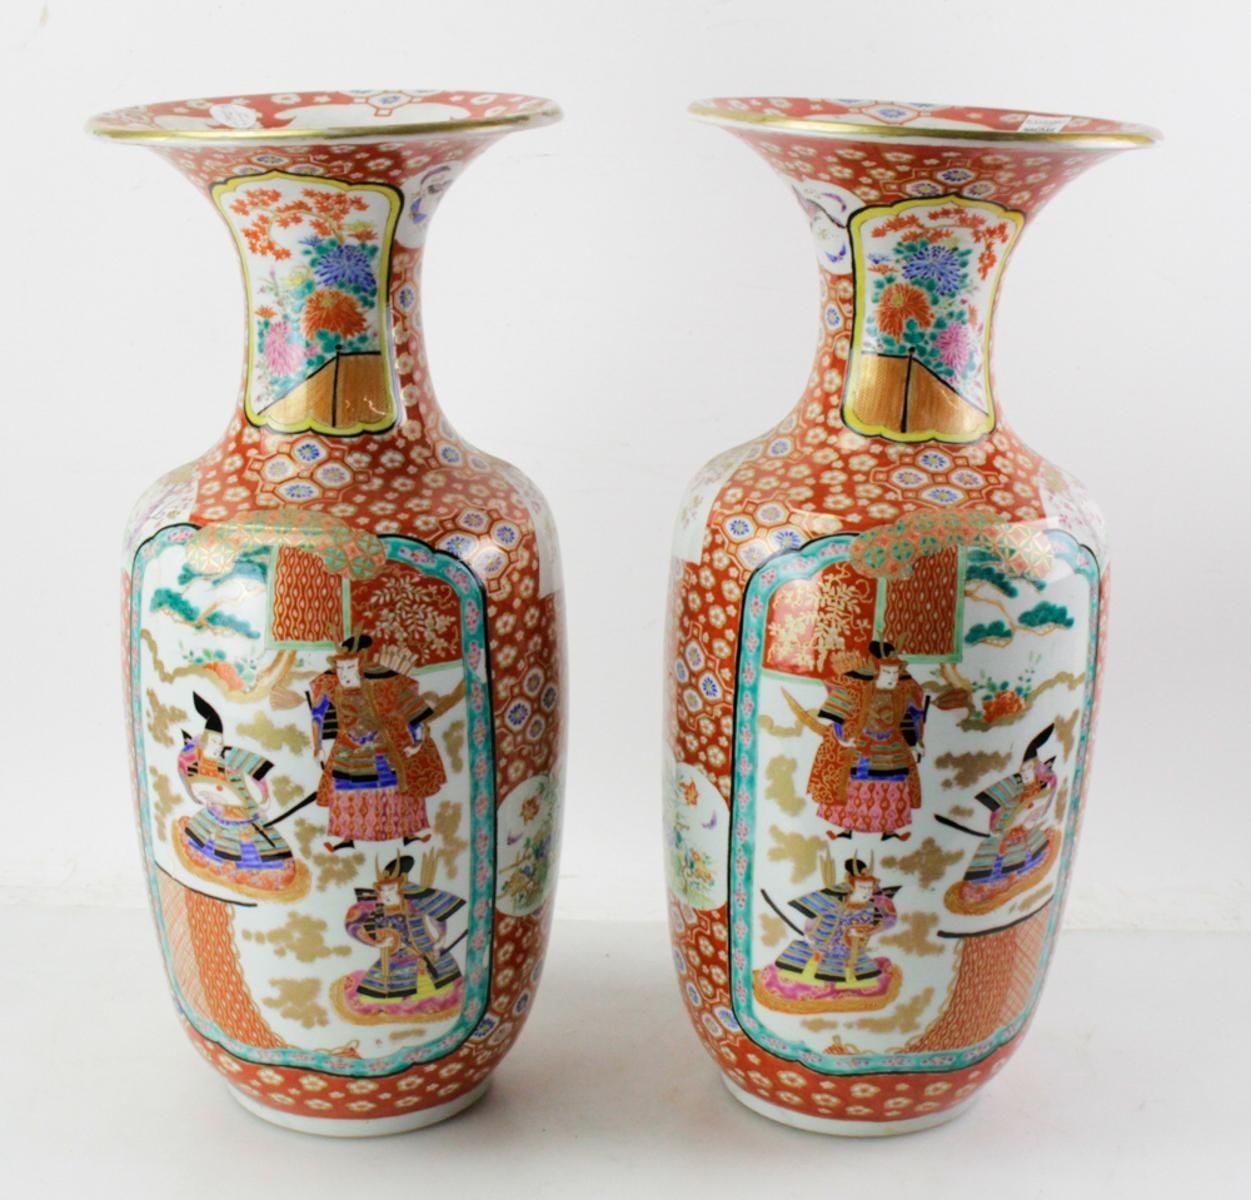 Beautiful pair of Late 19th Century Japanese porcelain vases showcasing a mesmerizing blend of artistic depictions and cultural storytelling. Adorned with vivid depictions of Samurai soldiers amidst intricate floral and botanical motifs, these vases